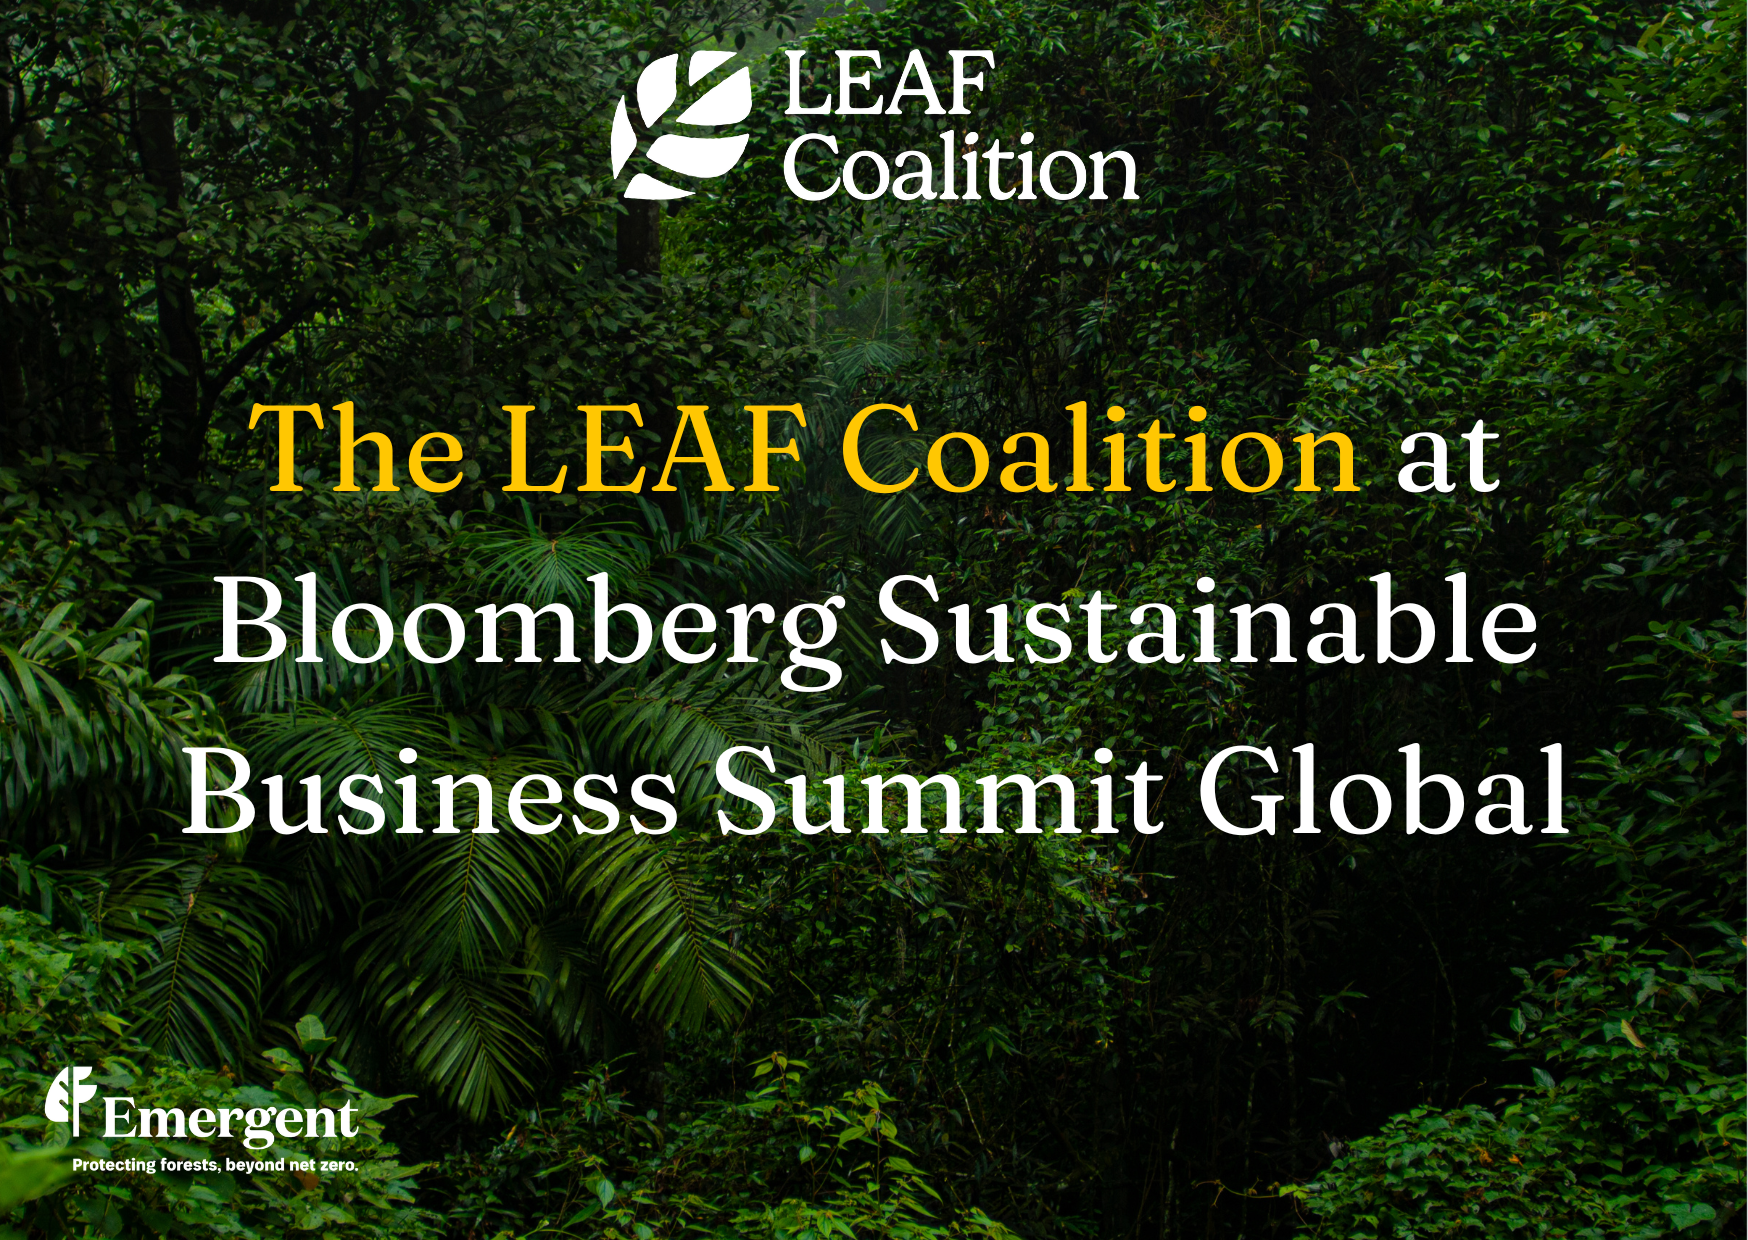 Bloomberg Sustainable Business Summit Global